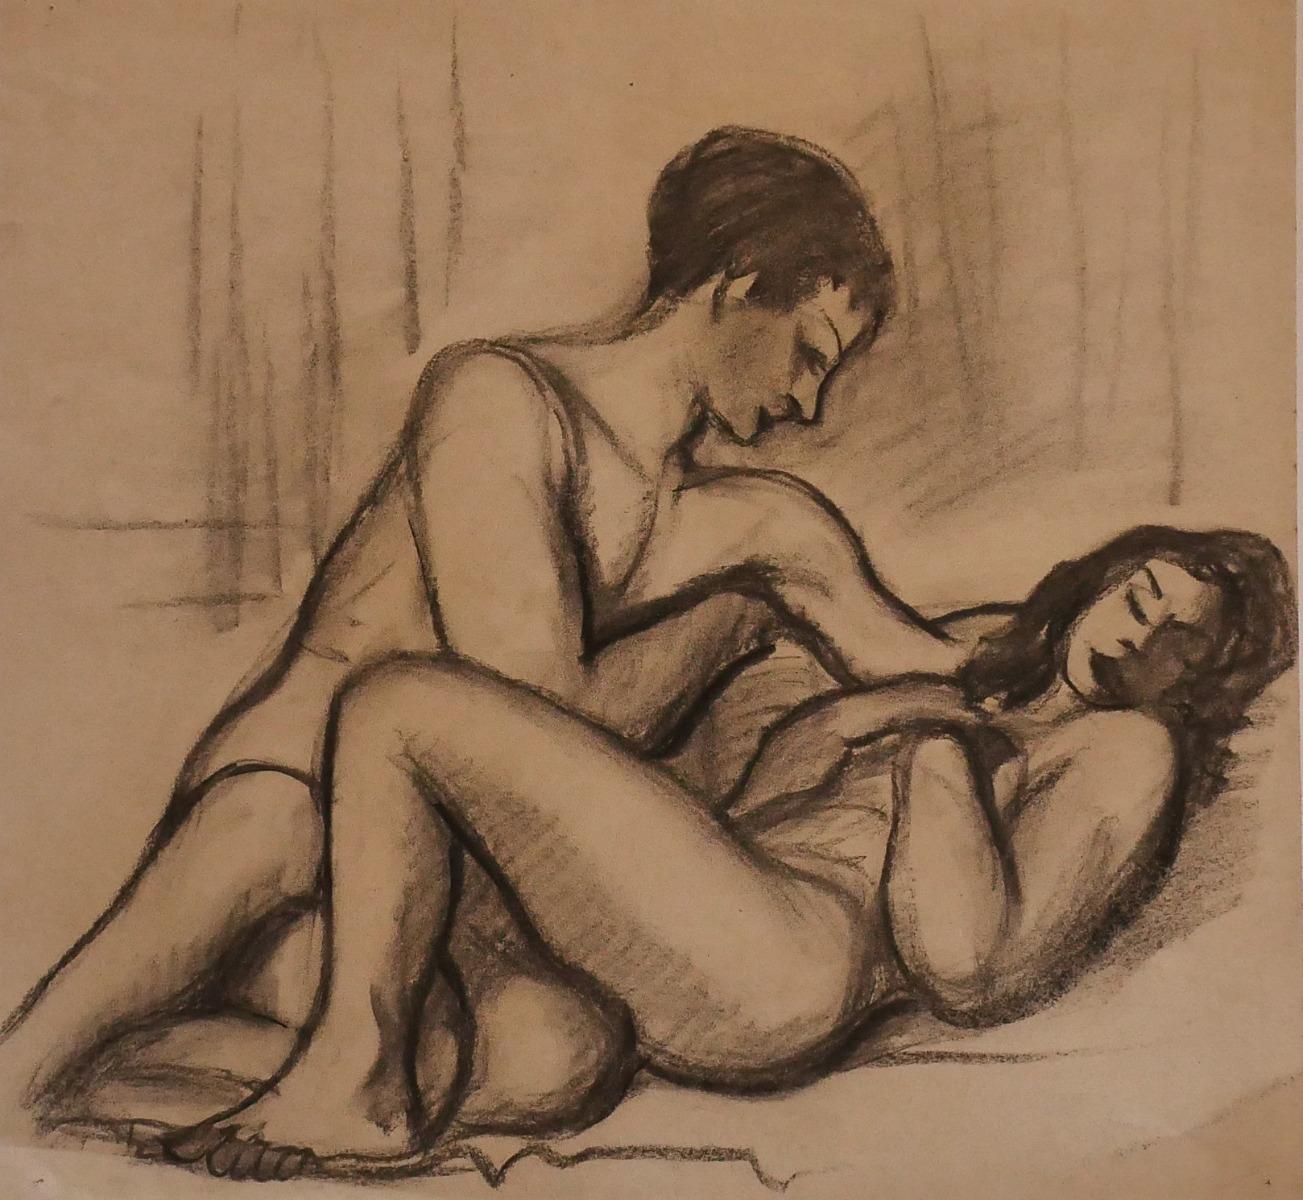 Unknown Figurative Art - Lovers - Charcoal Drawing - 1950 ca.